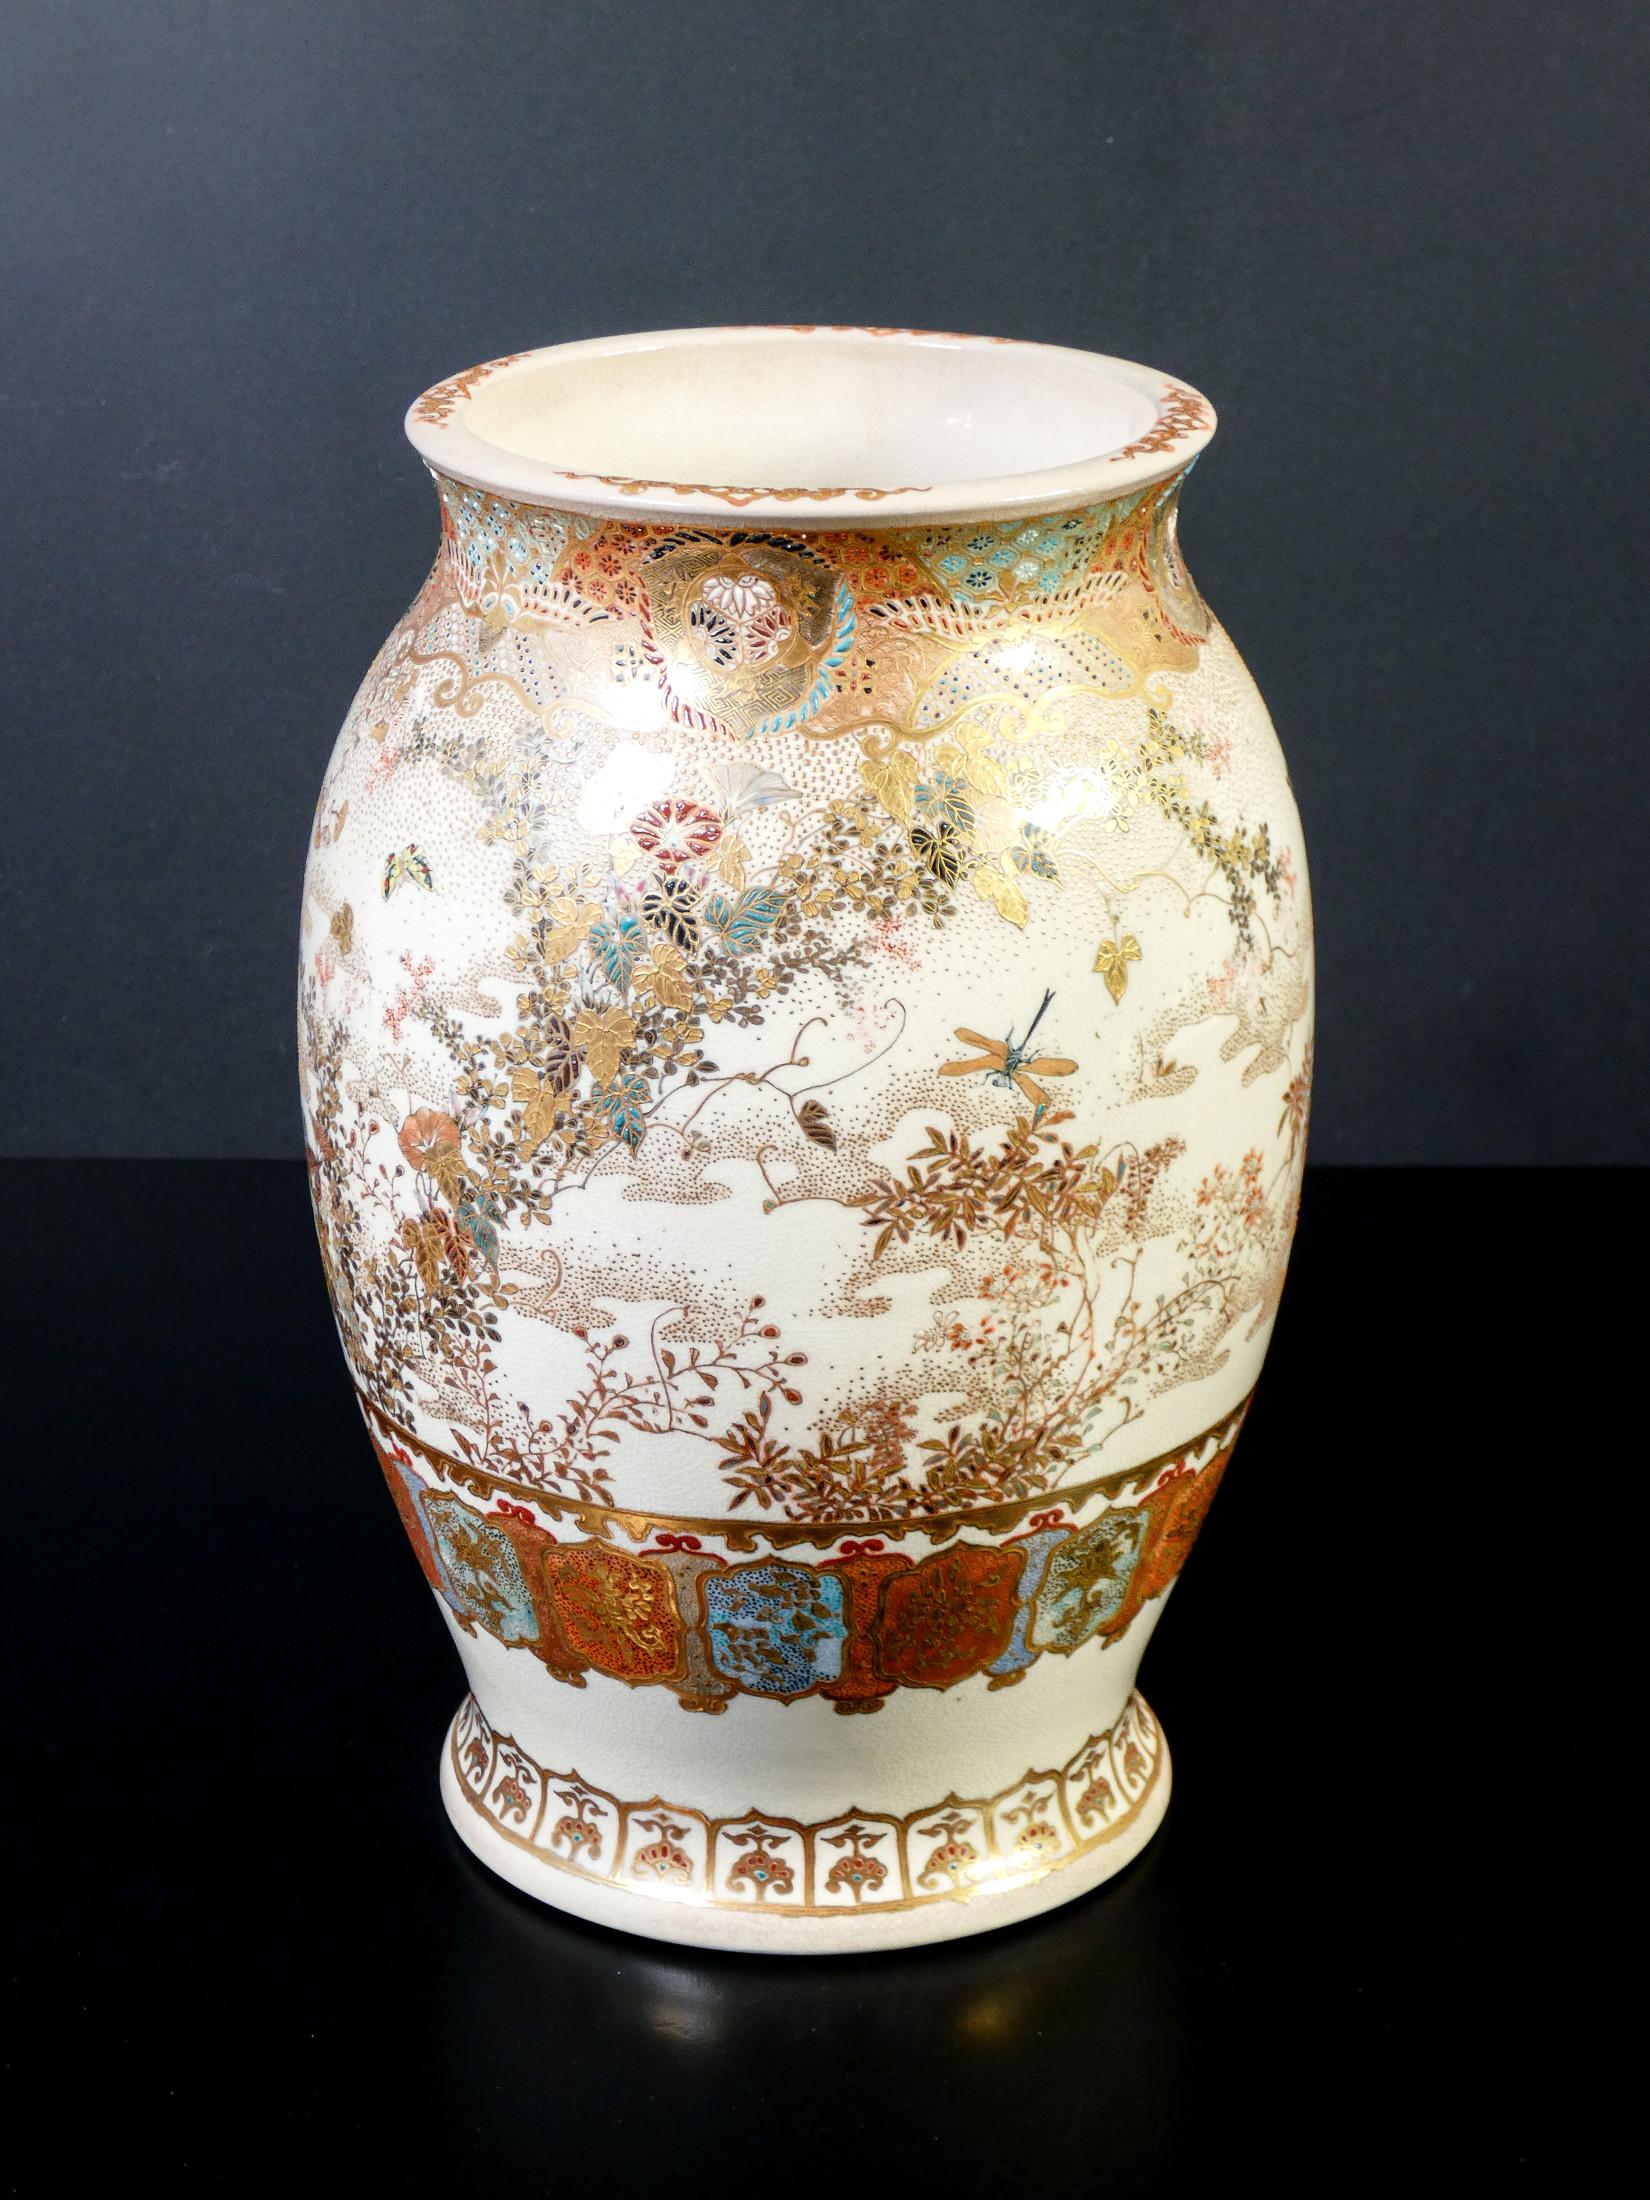 Japanese vase
in ceramic and polychrome enamel
attributable to the
hand of Kinkozan

ORIGIN
Japan

PERIOD
Meiji period 1800

AUTHOR
Referable to the
hand of Kinkozan

MATERIALS
Ceramic, polychrome glaze

DIMENSIONS
H 25 cm
Ø 16